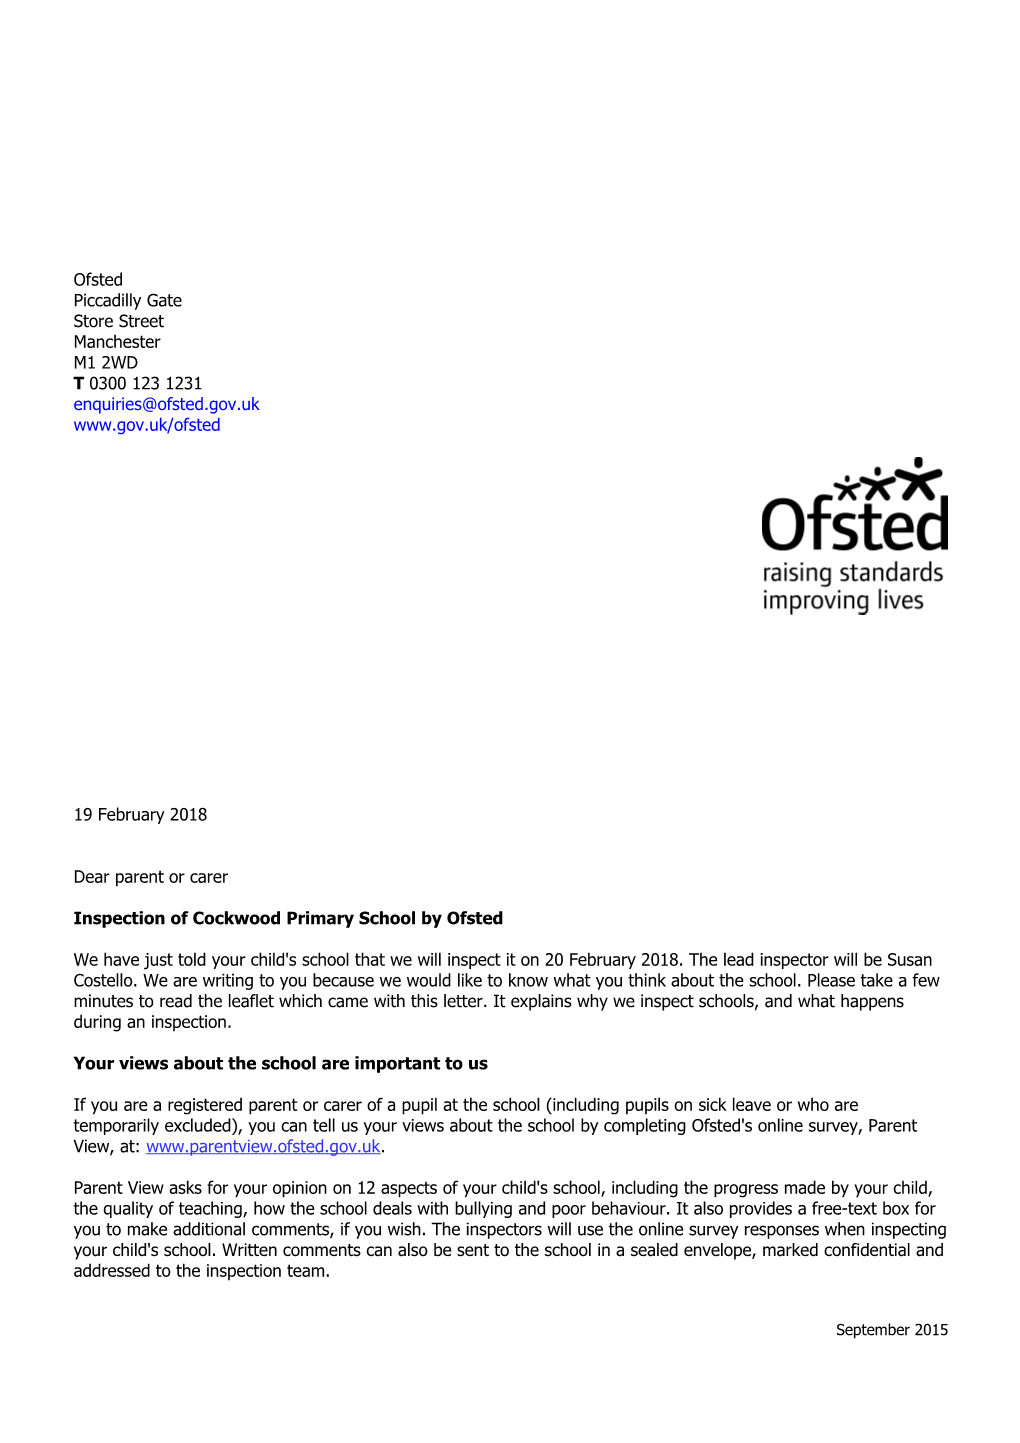 Inspection of Cockwood Primary School by Ofsted